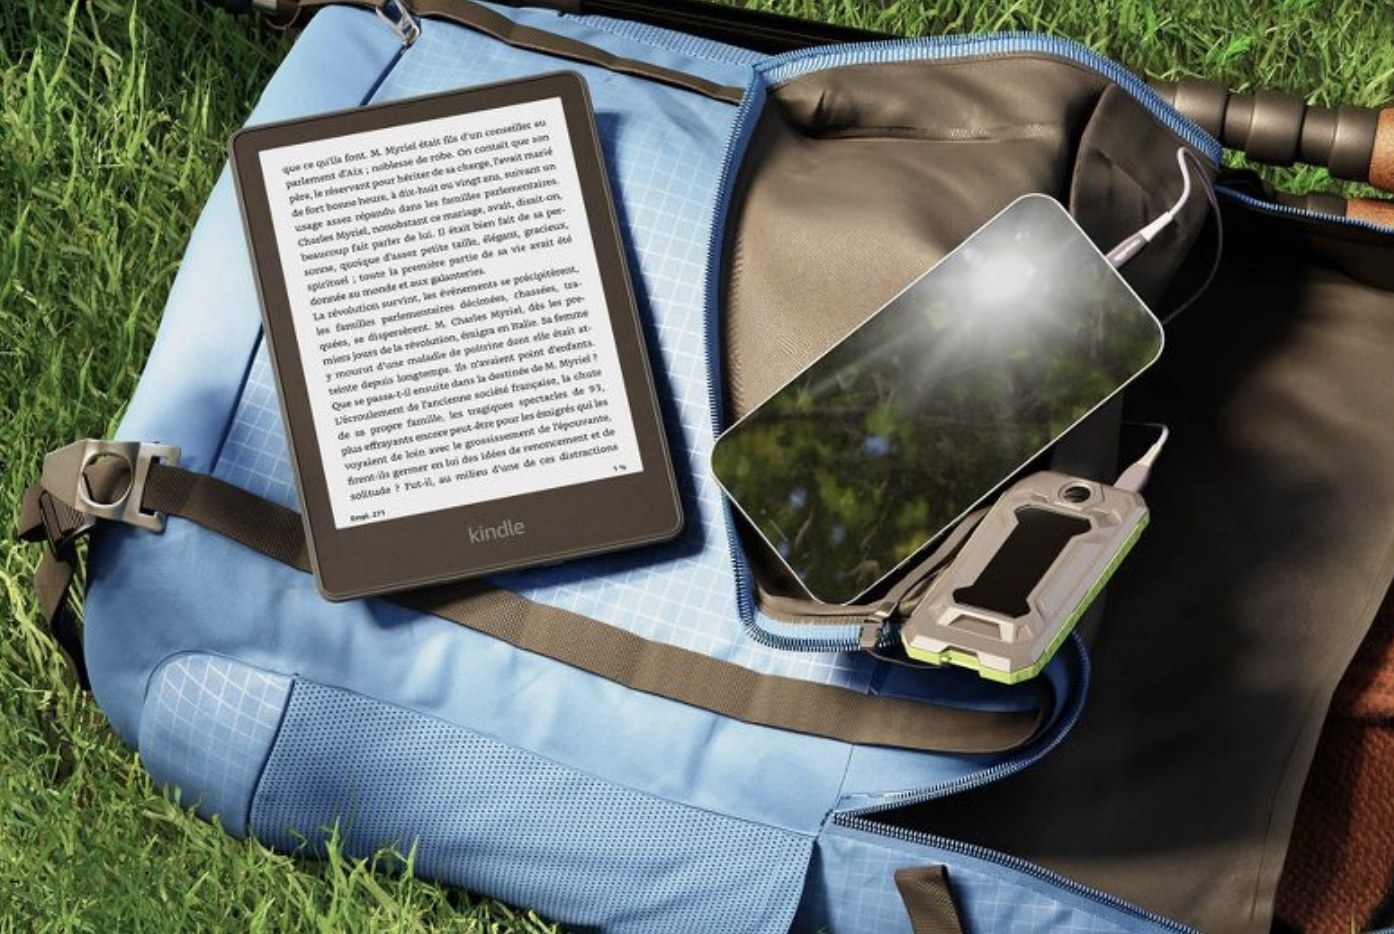 The black kindle resting on a backpack in the grass